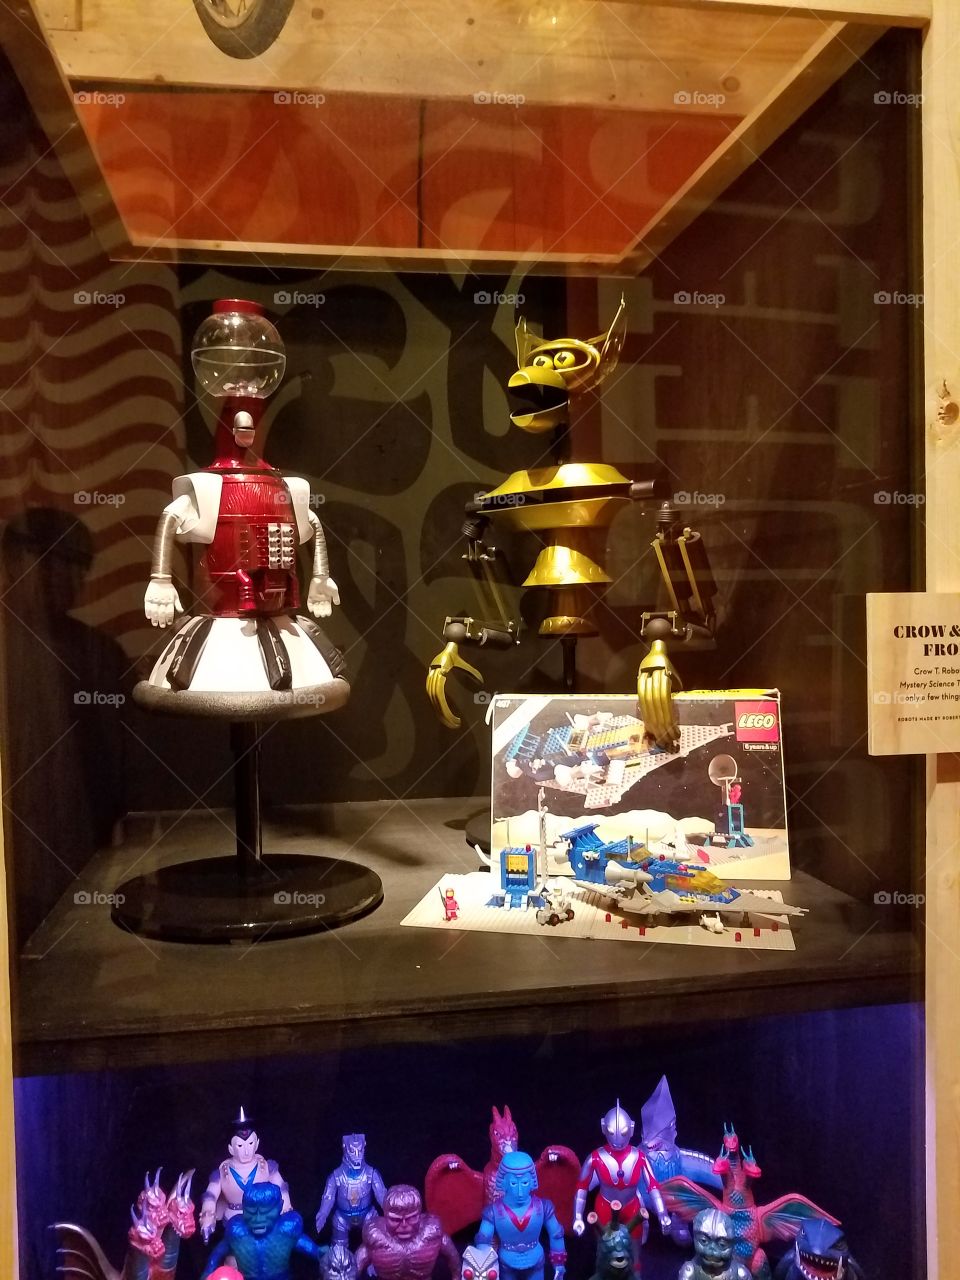 Mystery Science theater 3000 Tom Servo and Crow T Robot